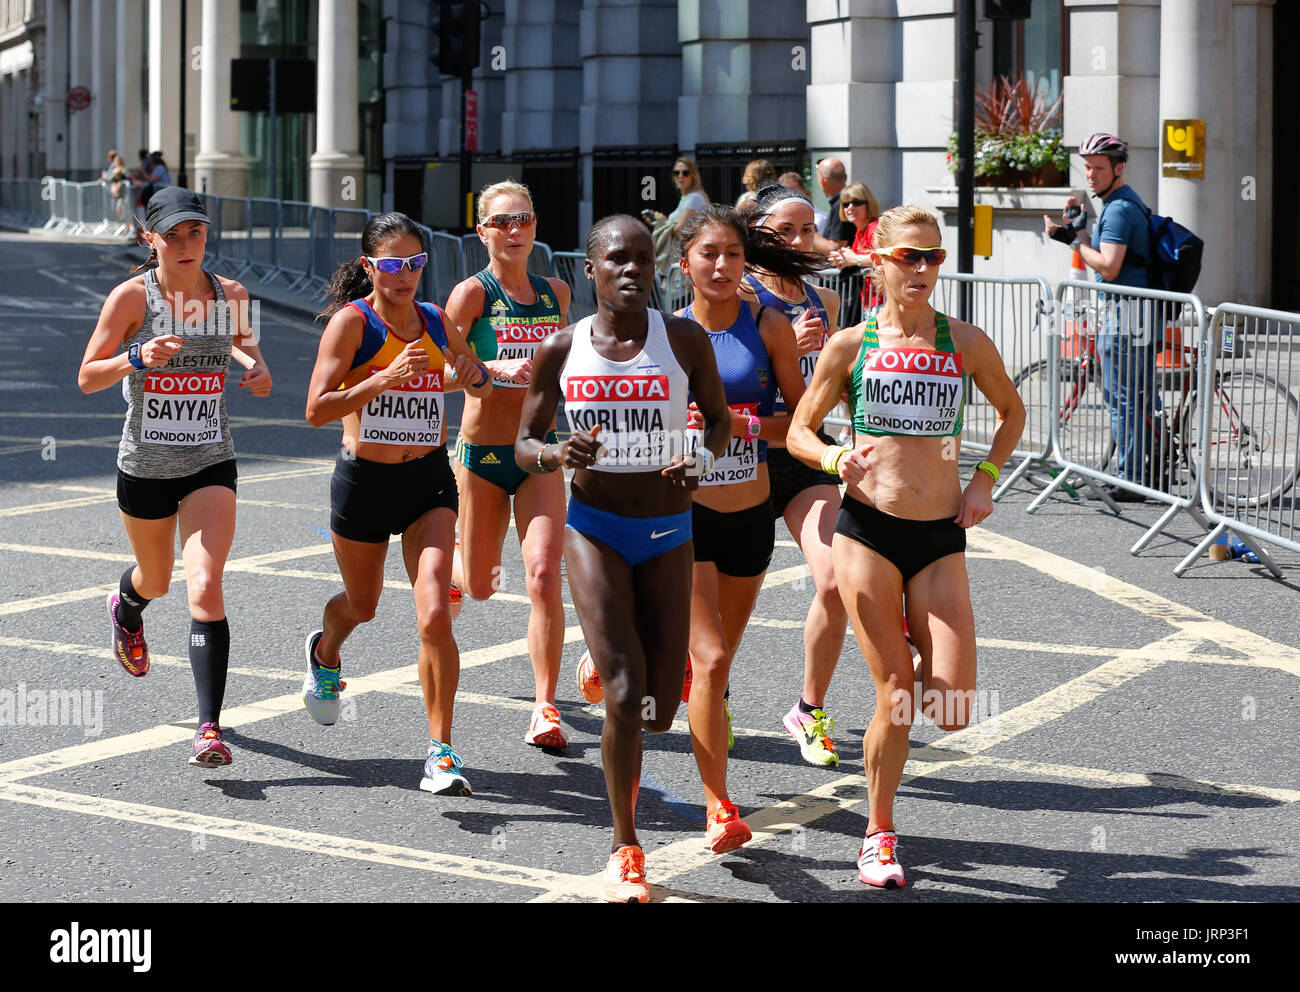 August 6th 2017 World Athletics Championship in London. IAAF women marathon 06/08/2017 started at 2pm local time. UK weather is perfect for a marathon with sun and few white clouds. Women running marathon are cometeing for a world champion title 2017. IAAF 2017 women marathon world champion and gold medal. Winner will be announced very soon. Stock Photo